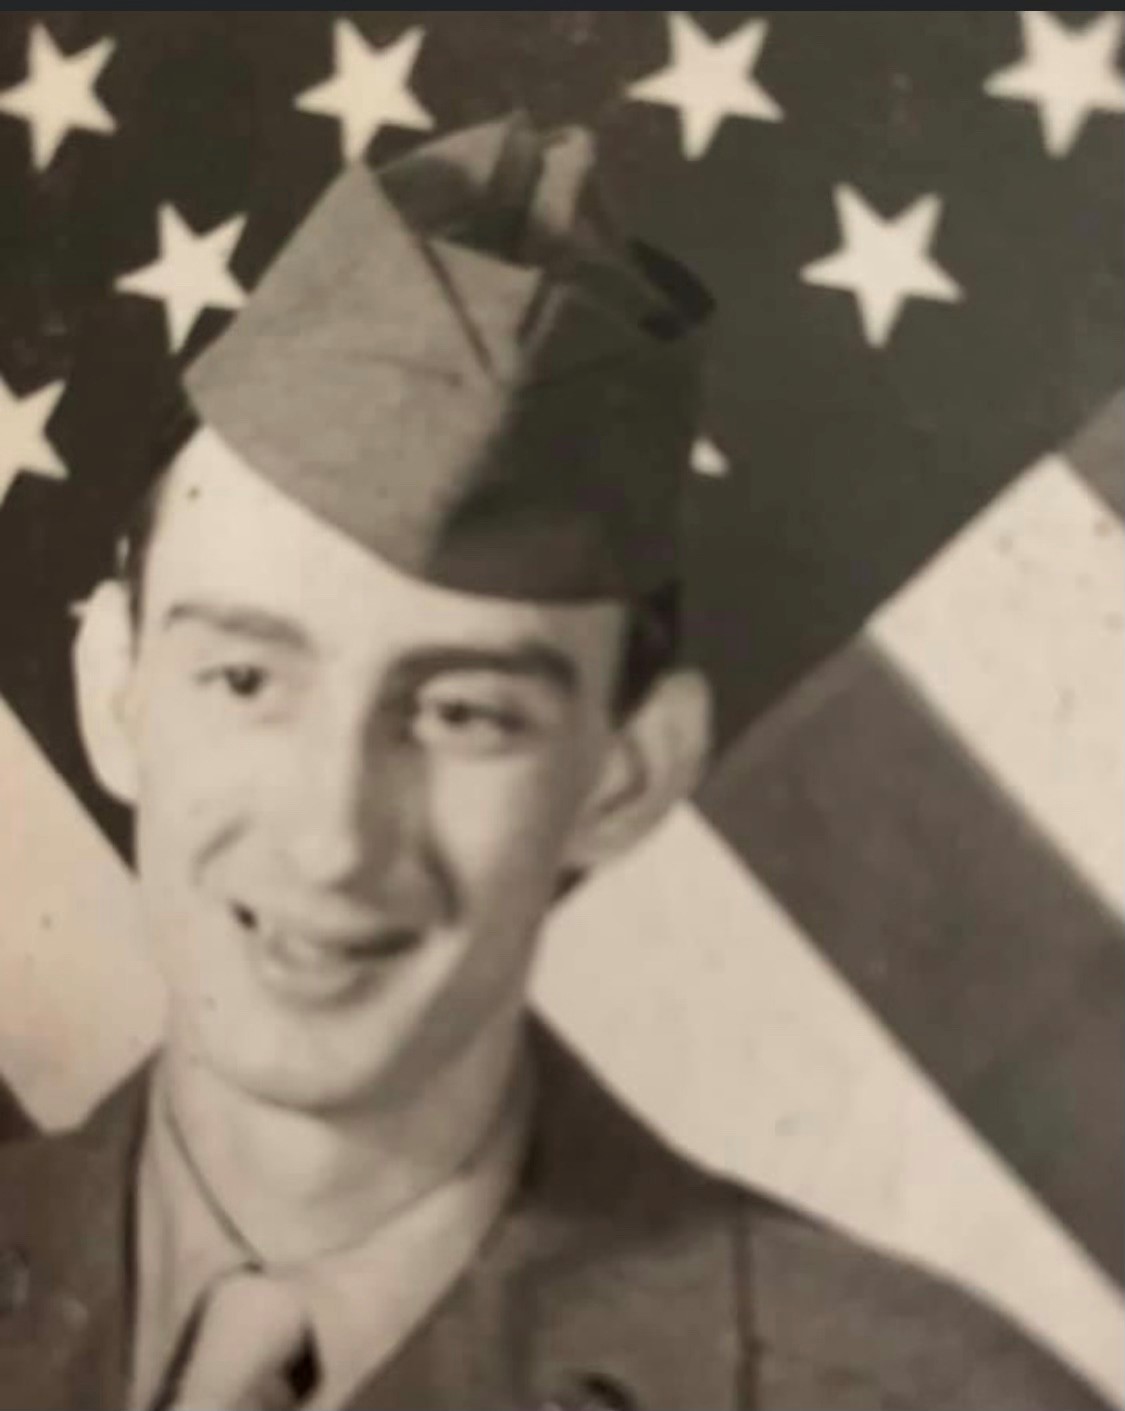 Veronica Santee's Dad Who Served in the 101st Airborne.